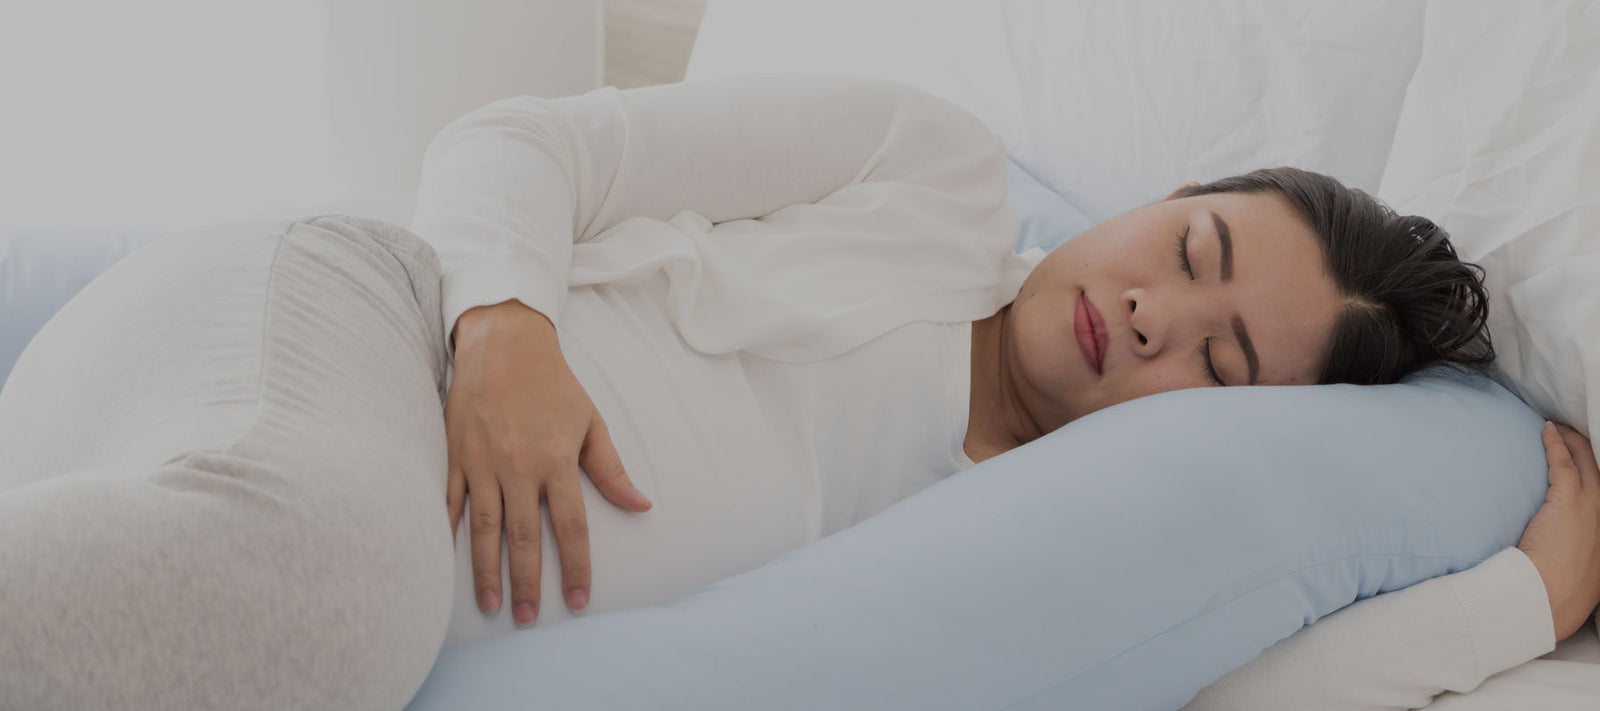 Sleeping With Pillow Between Legs; Can It Benefit Pregnant Women